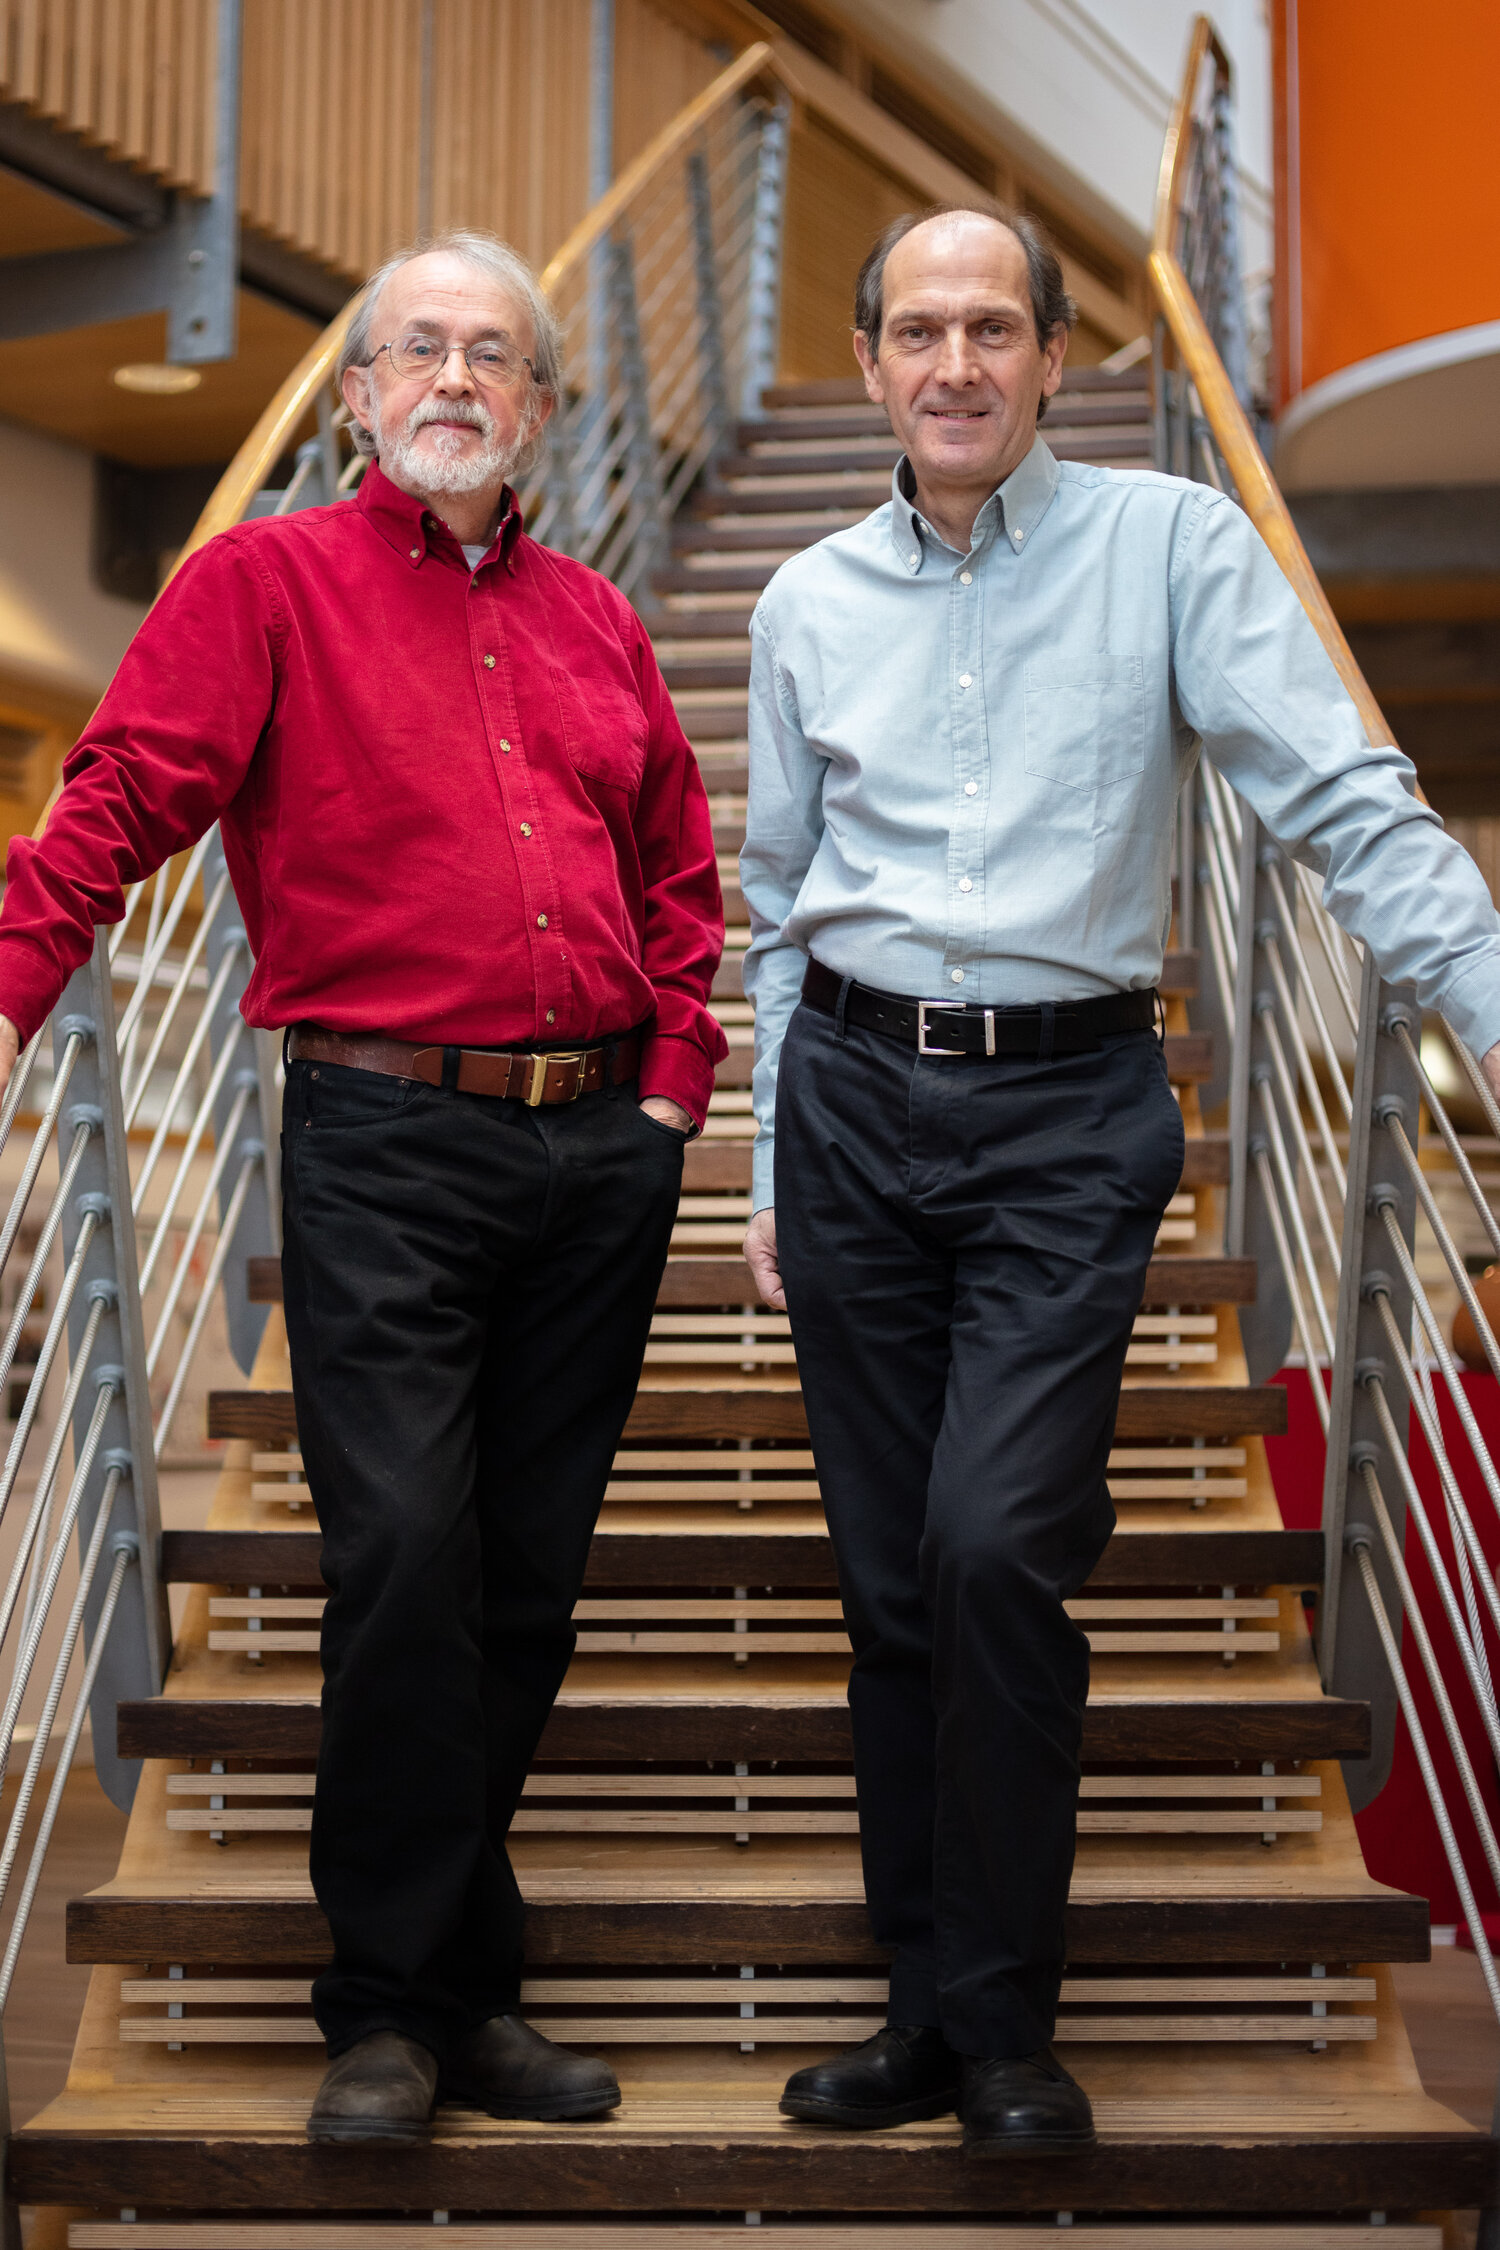 Peter Lord and David Sproxton, founders of Aardman Animations, on the day it became employee-owned in 2018.